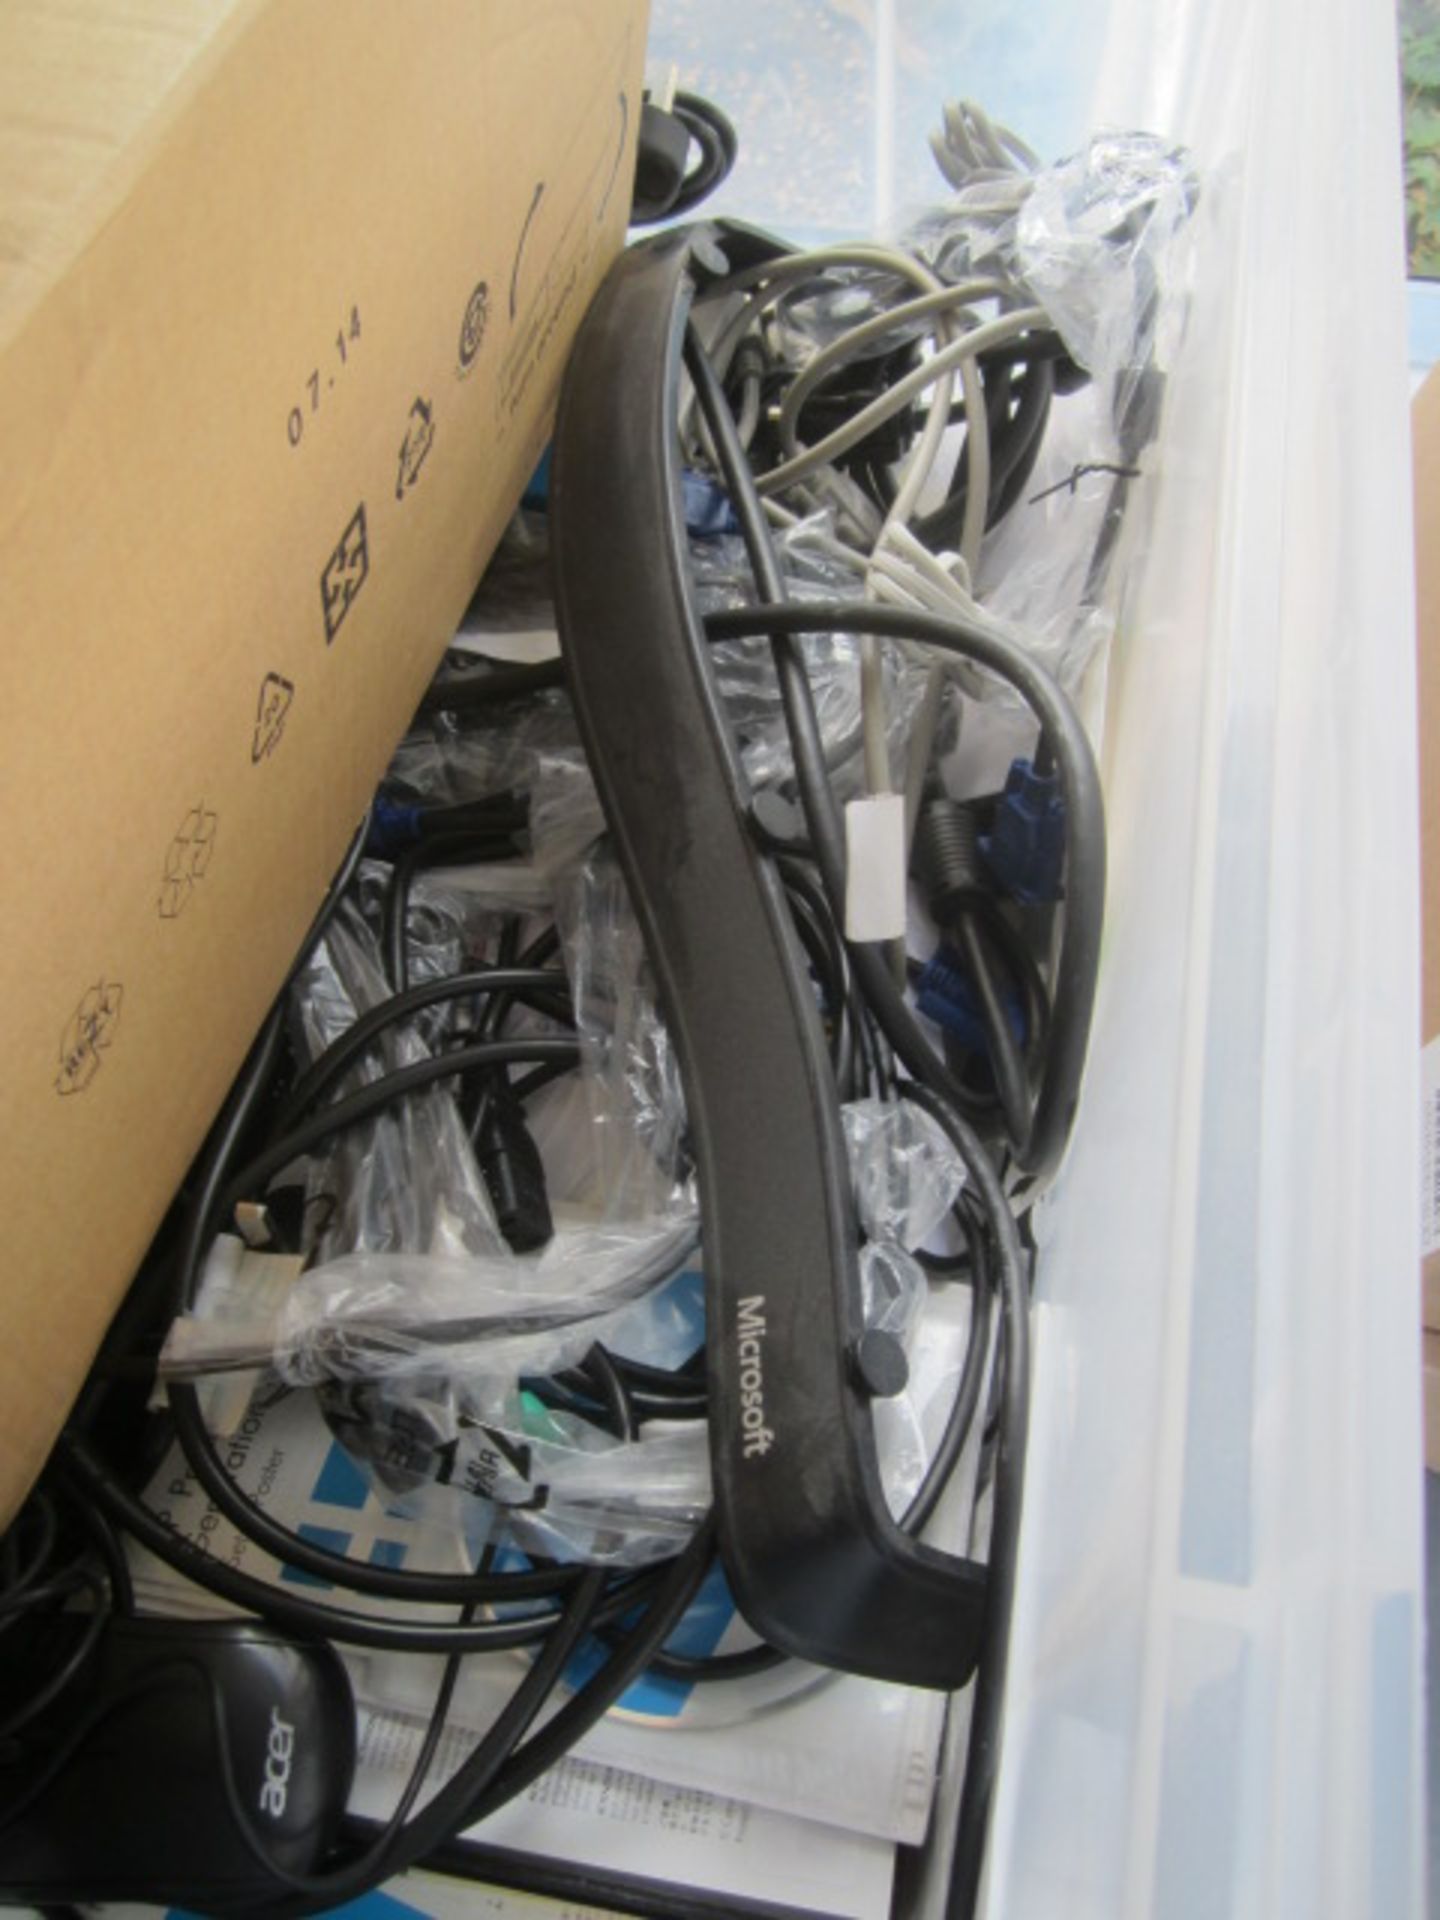 Quantity of various IT including keyboards, mice, computer cables etc. - Image 3 of 4